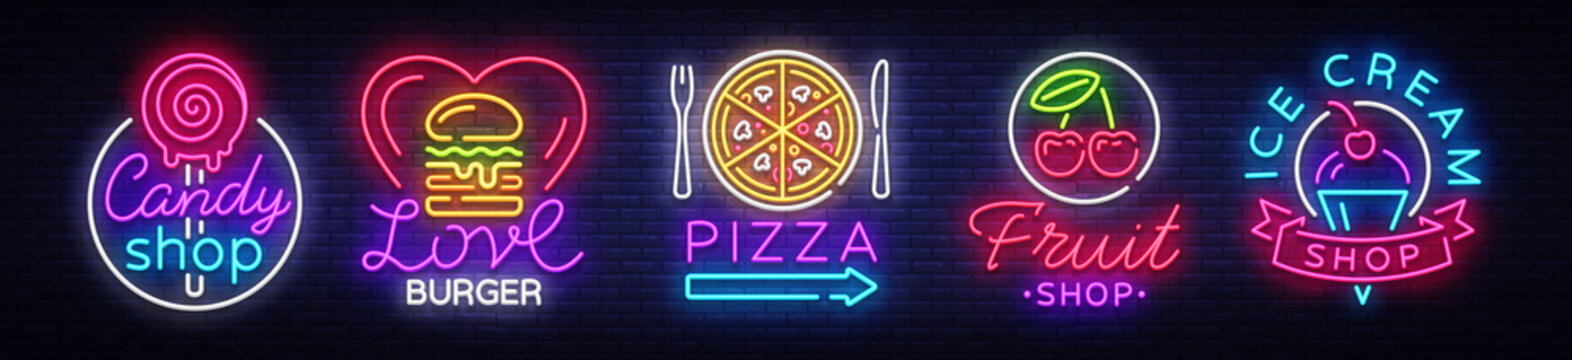 Big collection neon signs on theme food. Set Neon signs Burger, Sweets, Pizza, Fruits, Ice cream shop, Candy shop. Neon banner, light emblem logos. Vector illustration